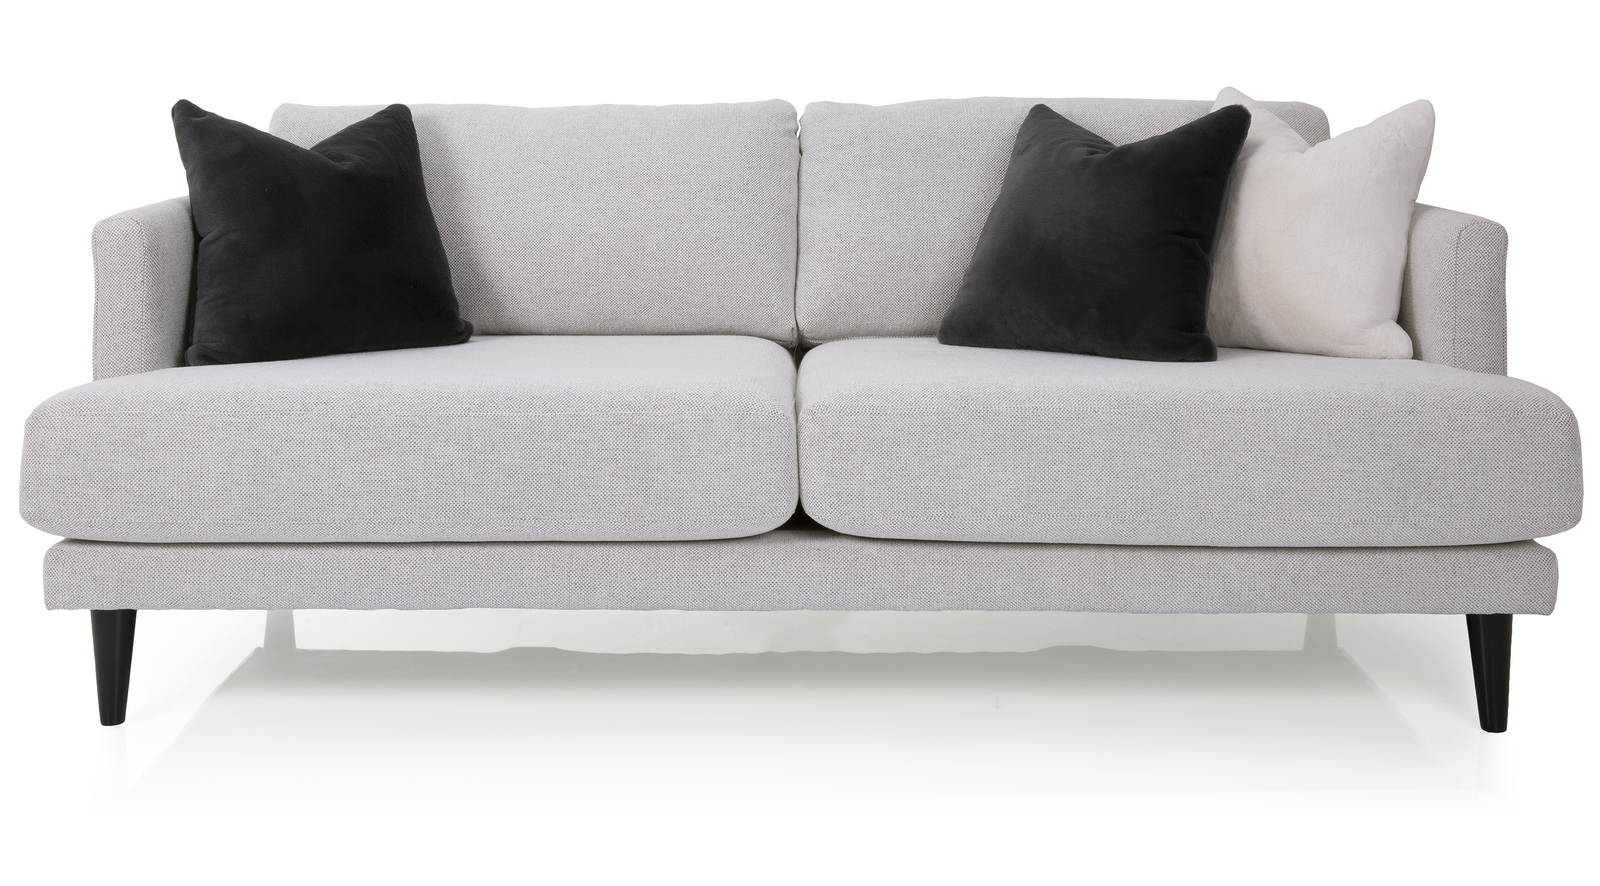 2089-01_Sofa_front_view